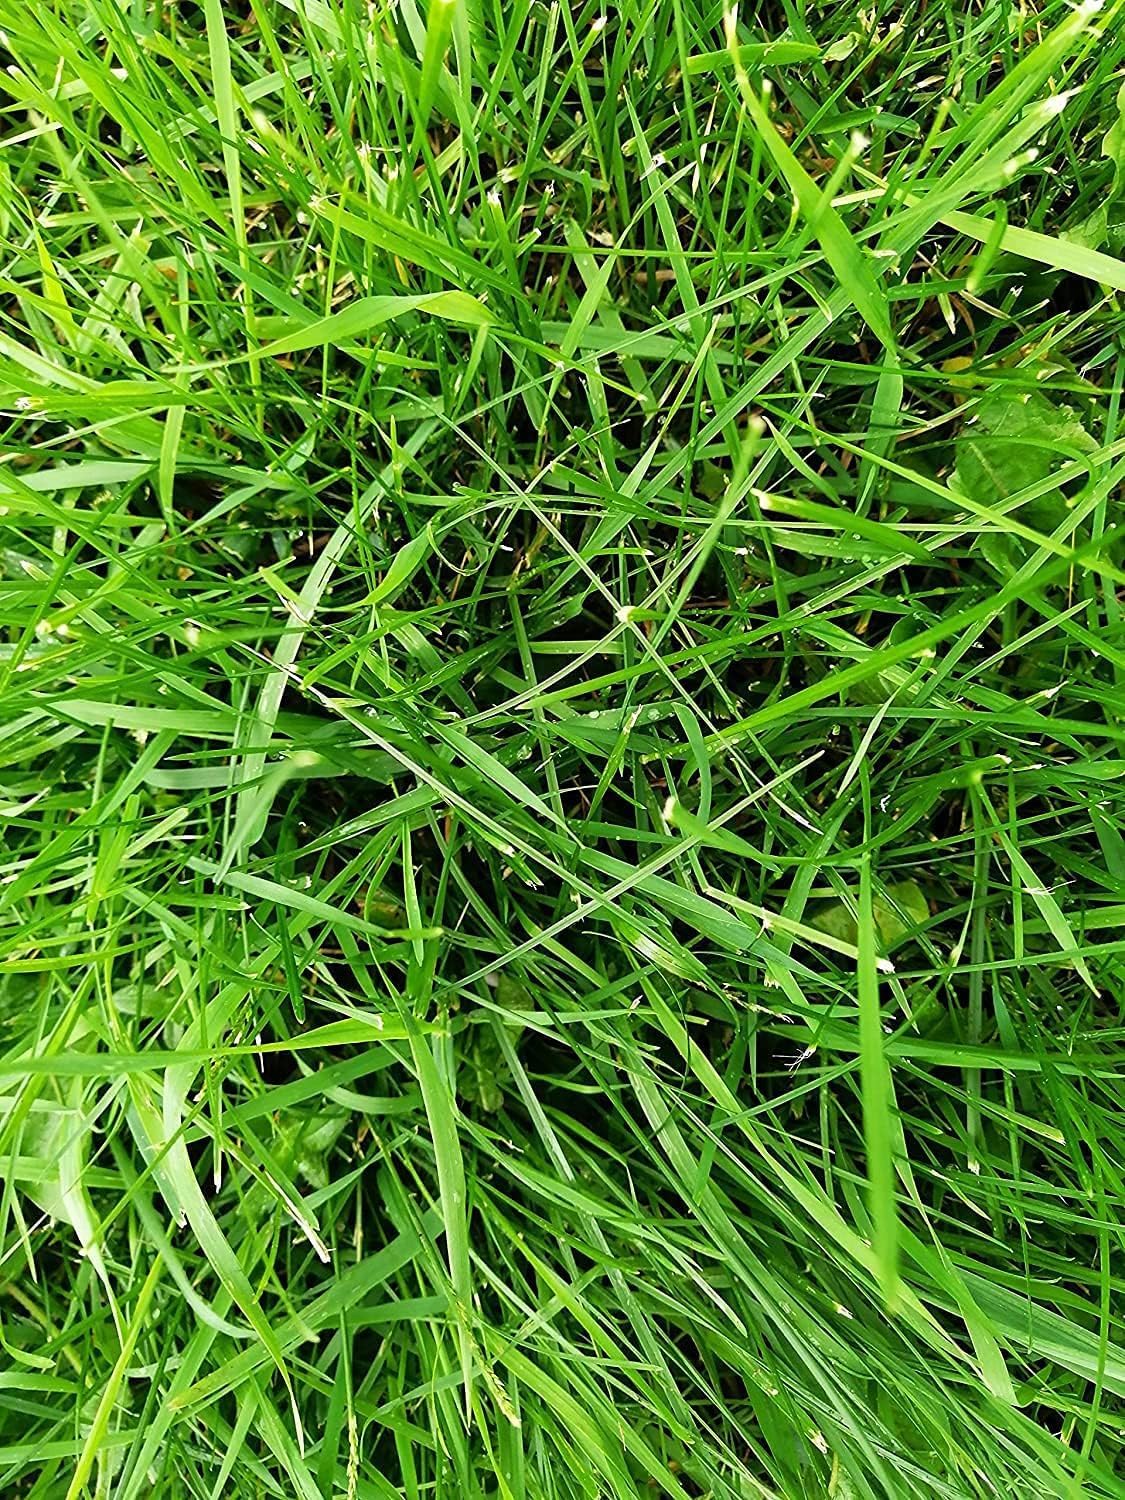 Hundredfold Certified Organic Perennial Ryegrass 2 lbs (Pounds) Seeds, Pure Seeds No Filler, Lolium perenne, English or Winter Ryegrass, Canadian Turf Seeds, Cover 500 sq ft